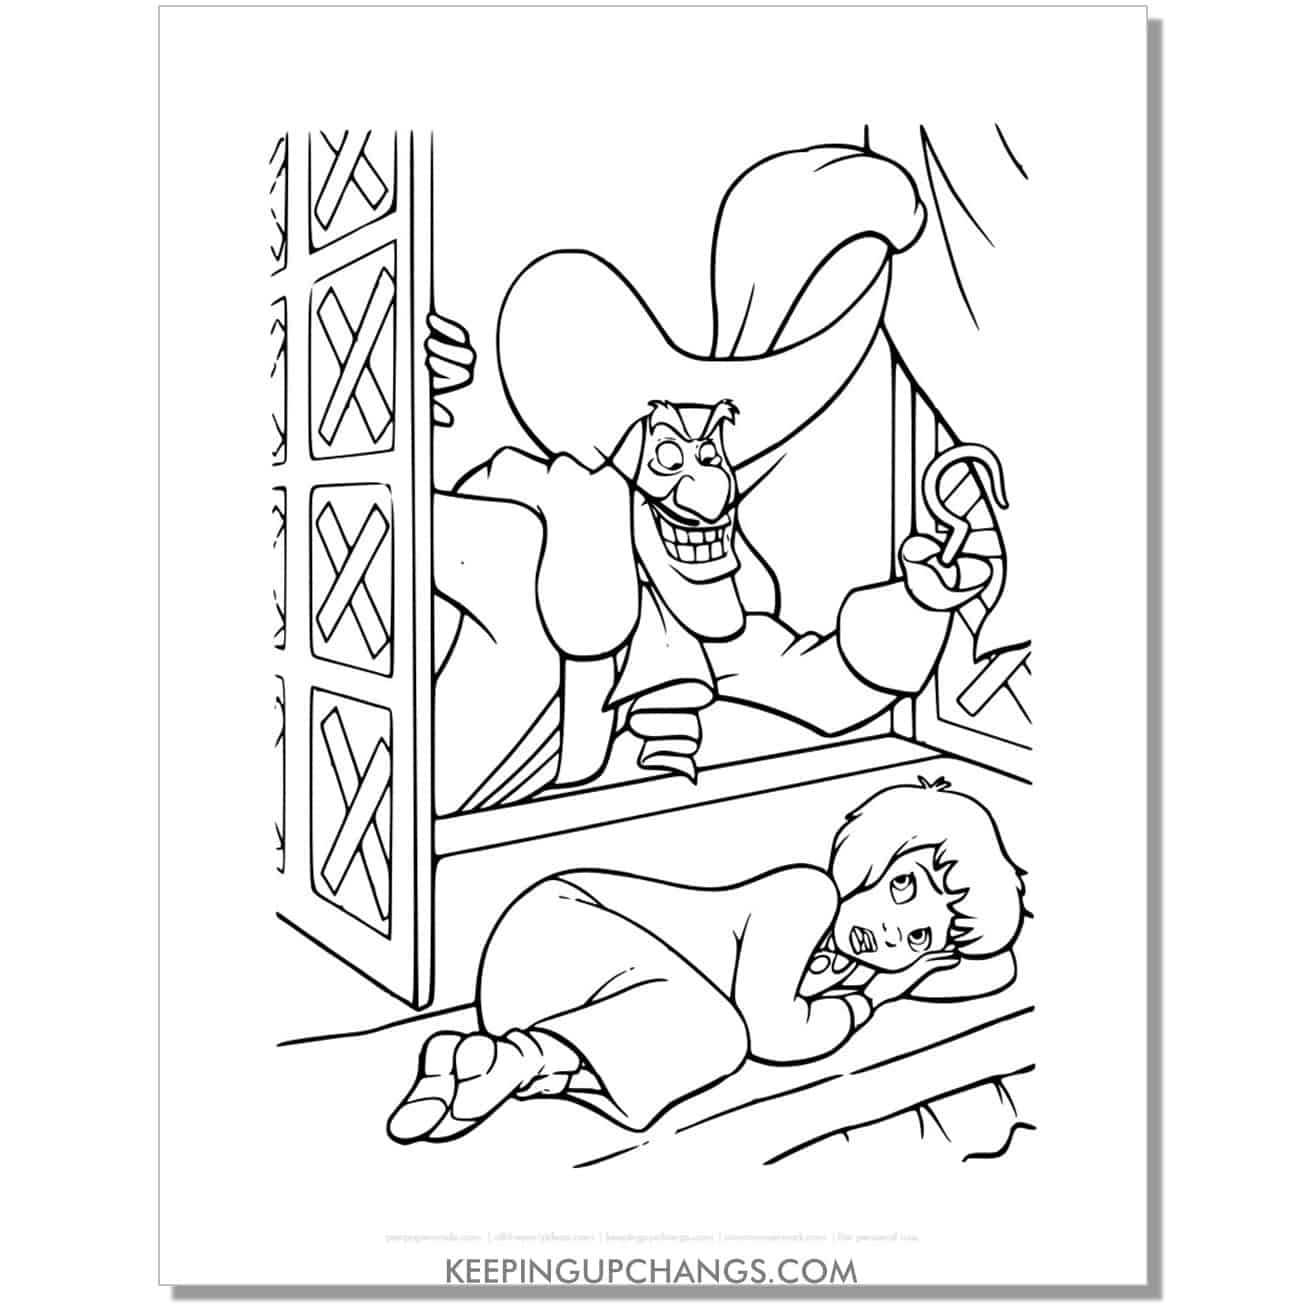 captain hook at jane darling's window coloring page, sheet.